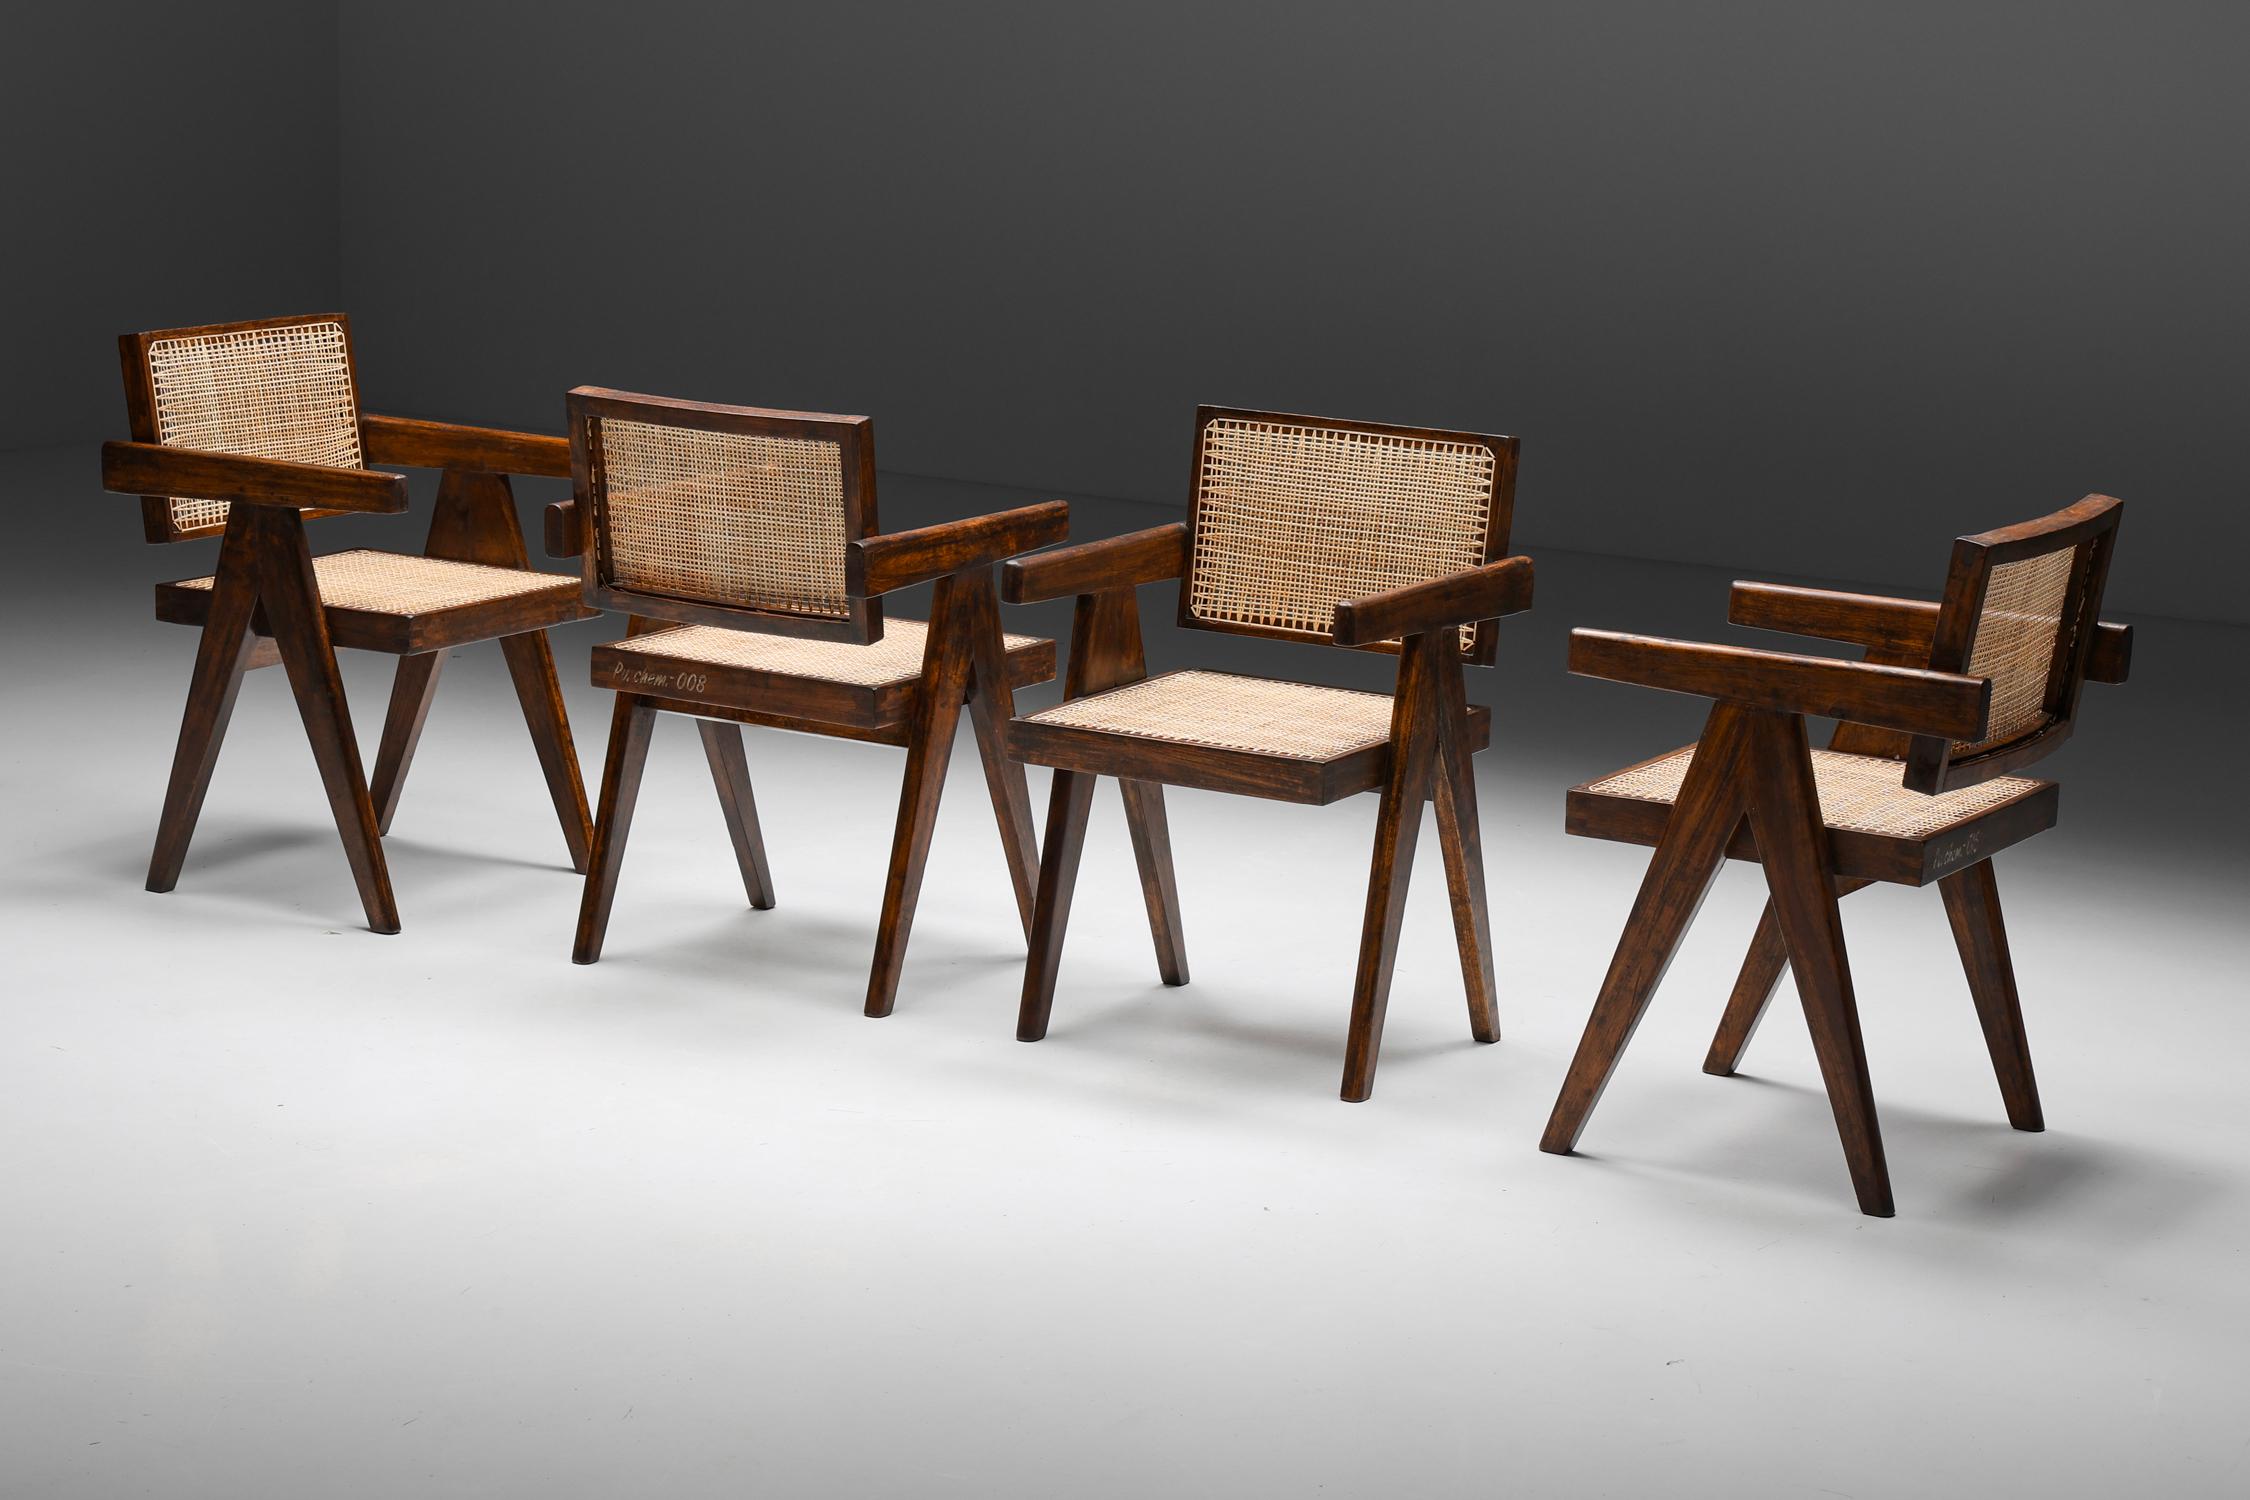 Office Cane chairs; Pierre Jeanneret; Indian rosewood; Solid Sisso; floating back; India; Chandigarh; PJ-SI-28-A; 1955; Mid-Century Modern; Le Corbusier; armchairs;

Iconic 